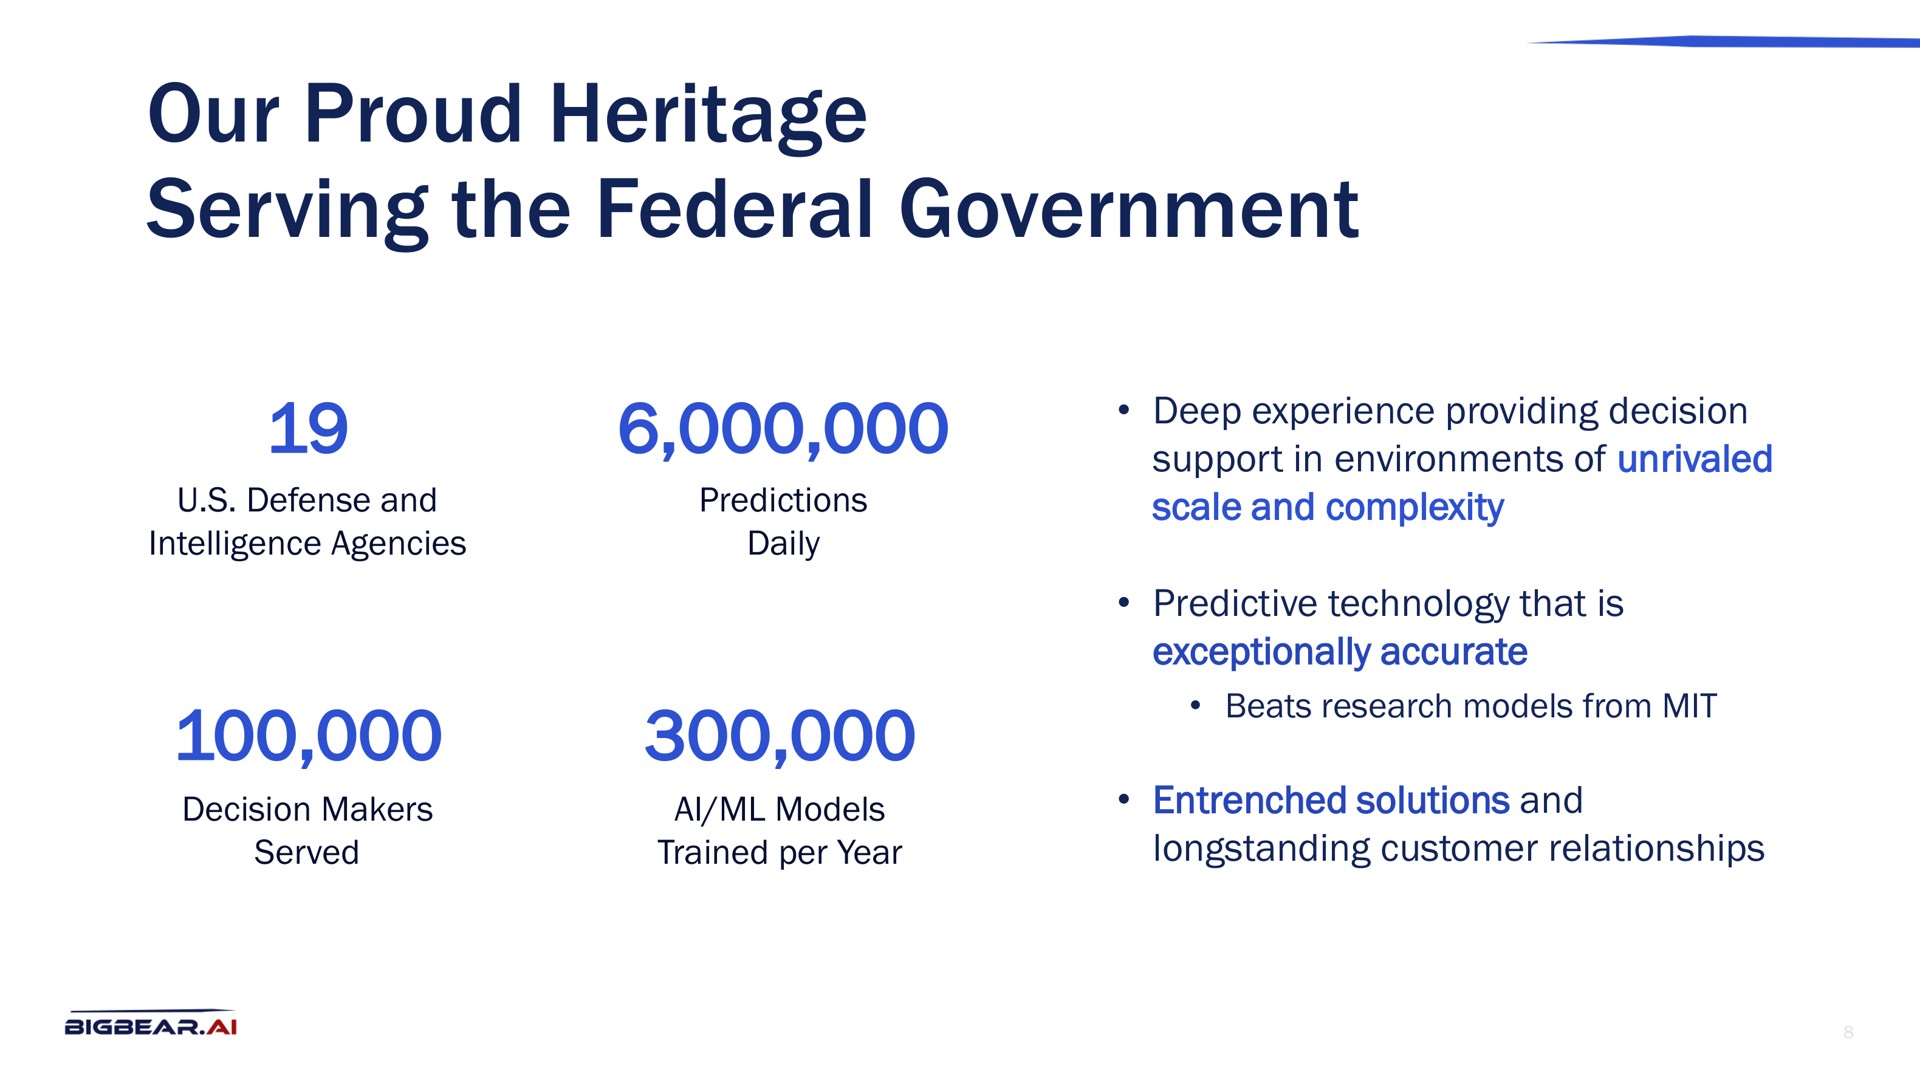 our heritage serving the federal government | Bigbear AI